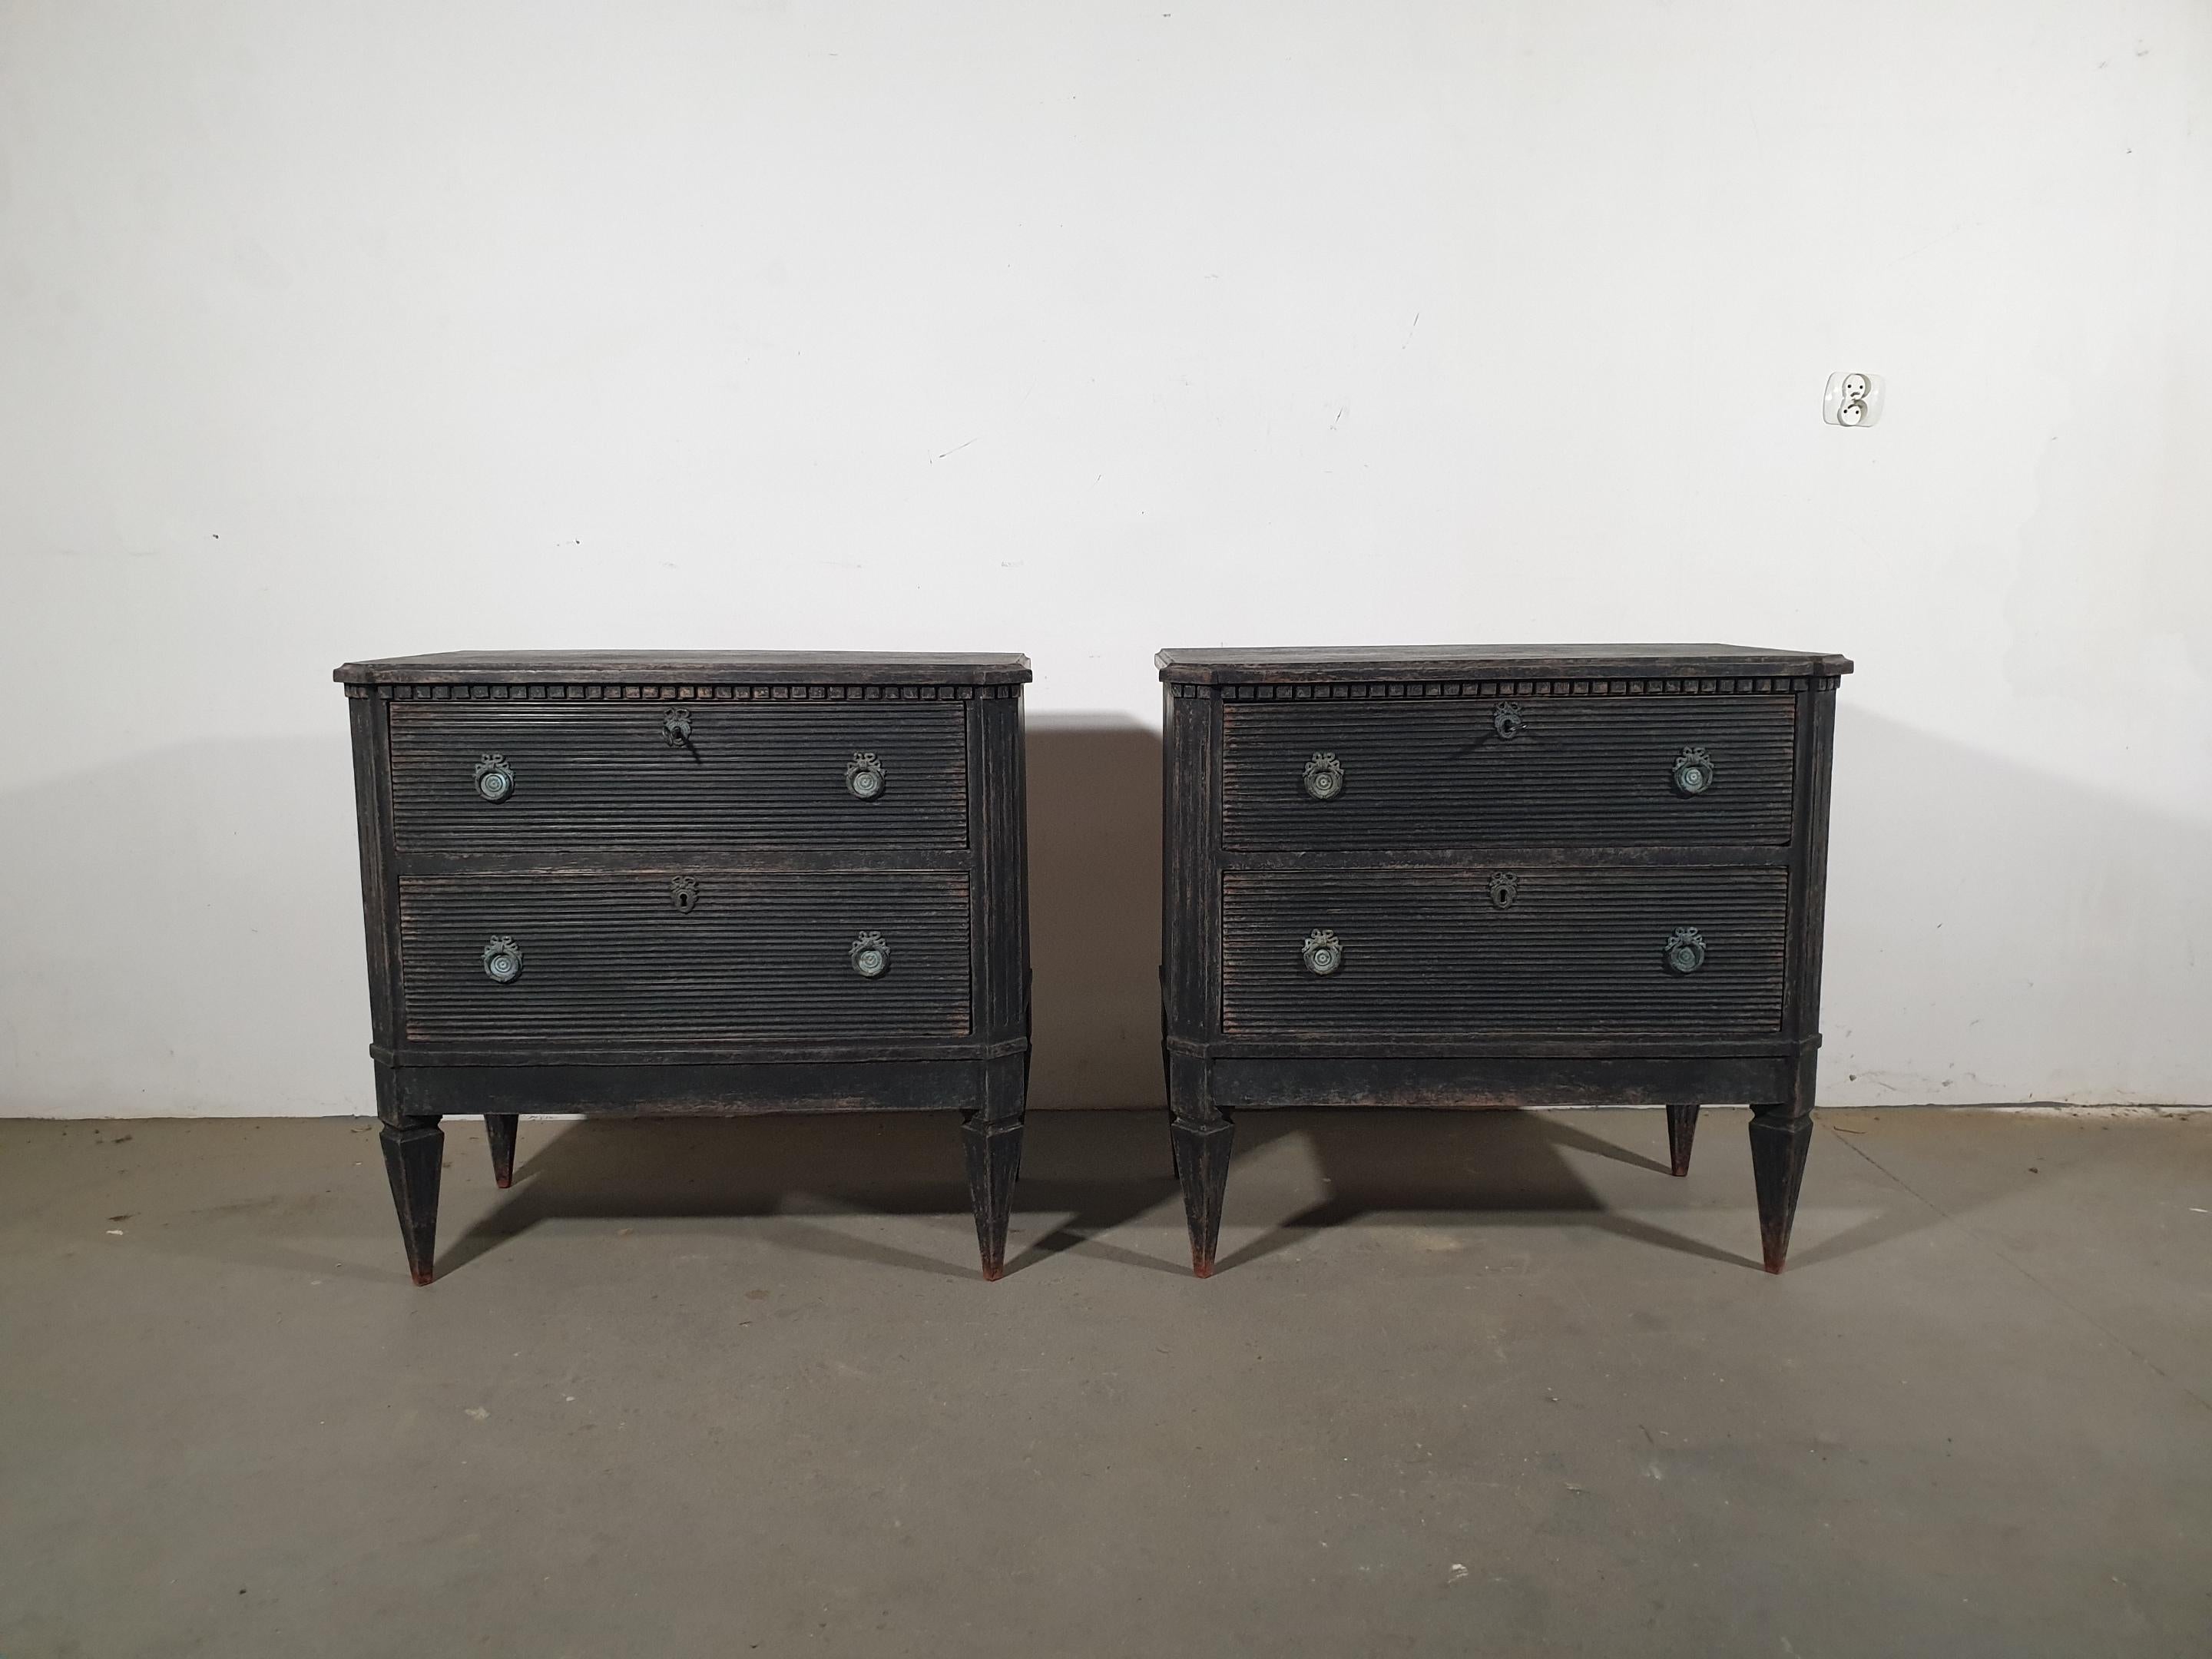 A pair of Swedish Gustavian style painted wood chests from circa 1870 with two fluted drawers, fluted side posts, tapered legs and classical hardware. This exquisite pair of Swedish Gustavian style chests, dating back to circa 1870, exude a timeless